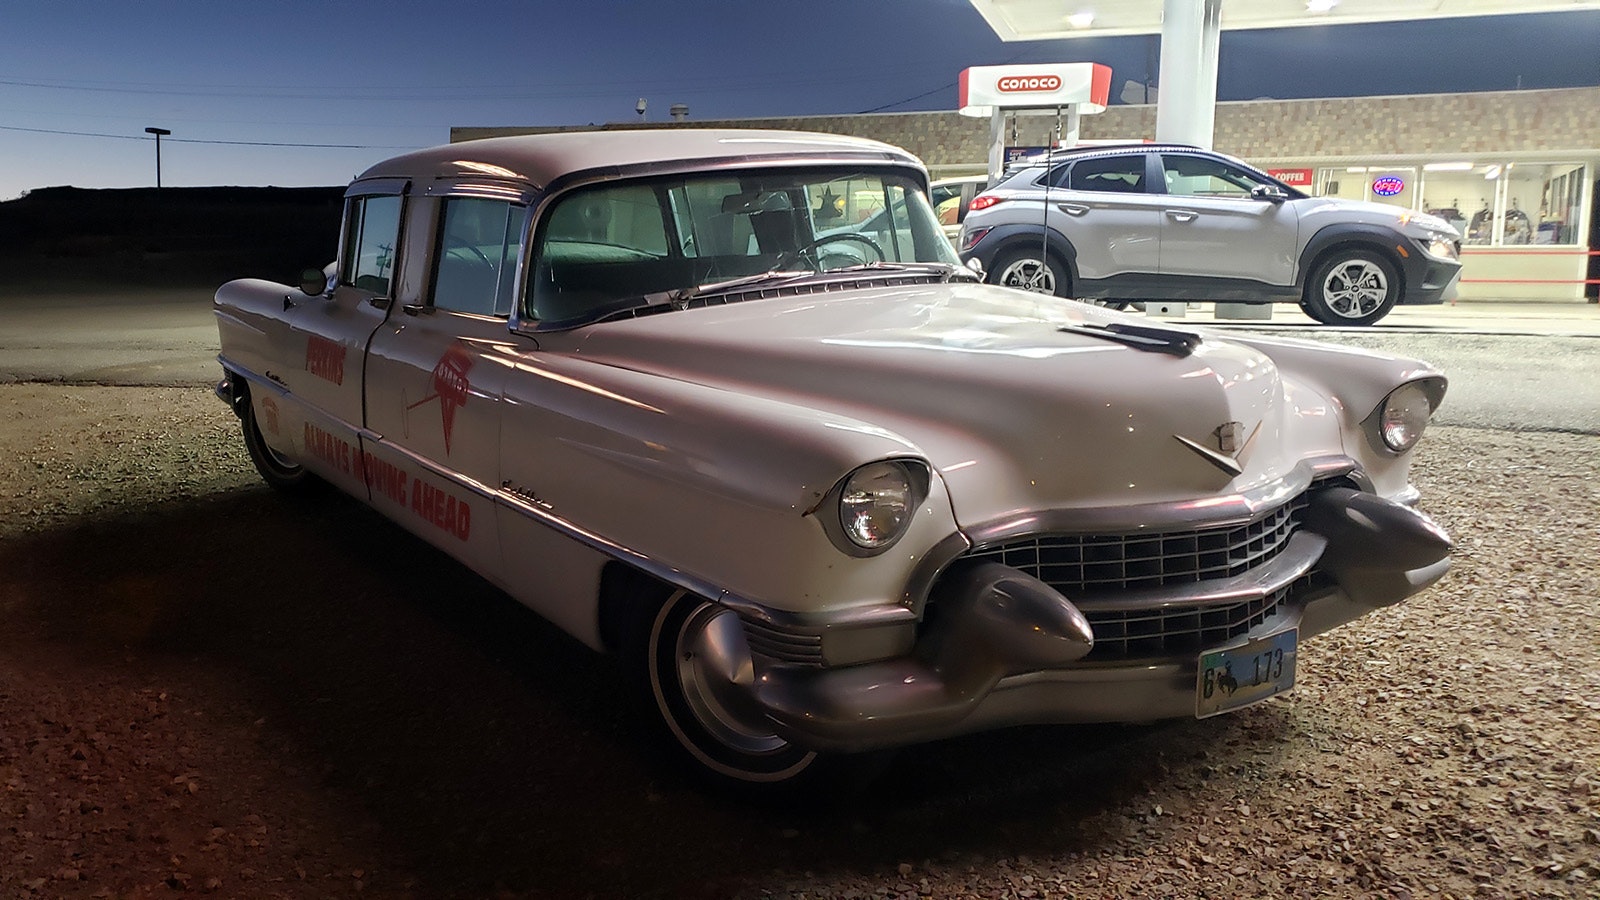 Lots of people have tried to buy the two-headed Cadillac in Rawlins at the Conoco station. It's not for sale, although customers are welcome to take selfies with the car.